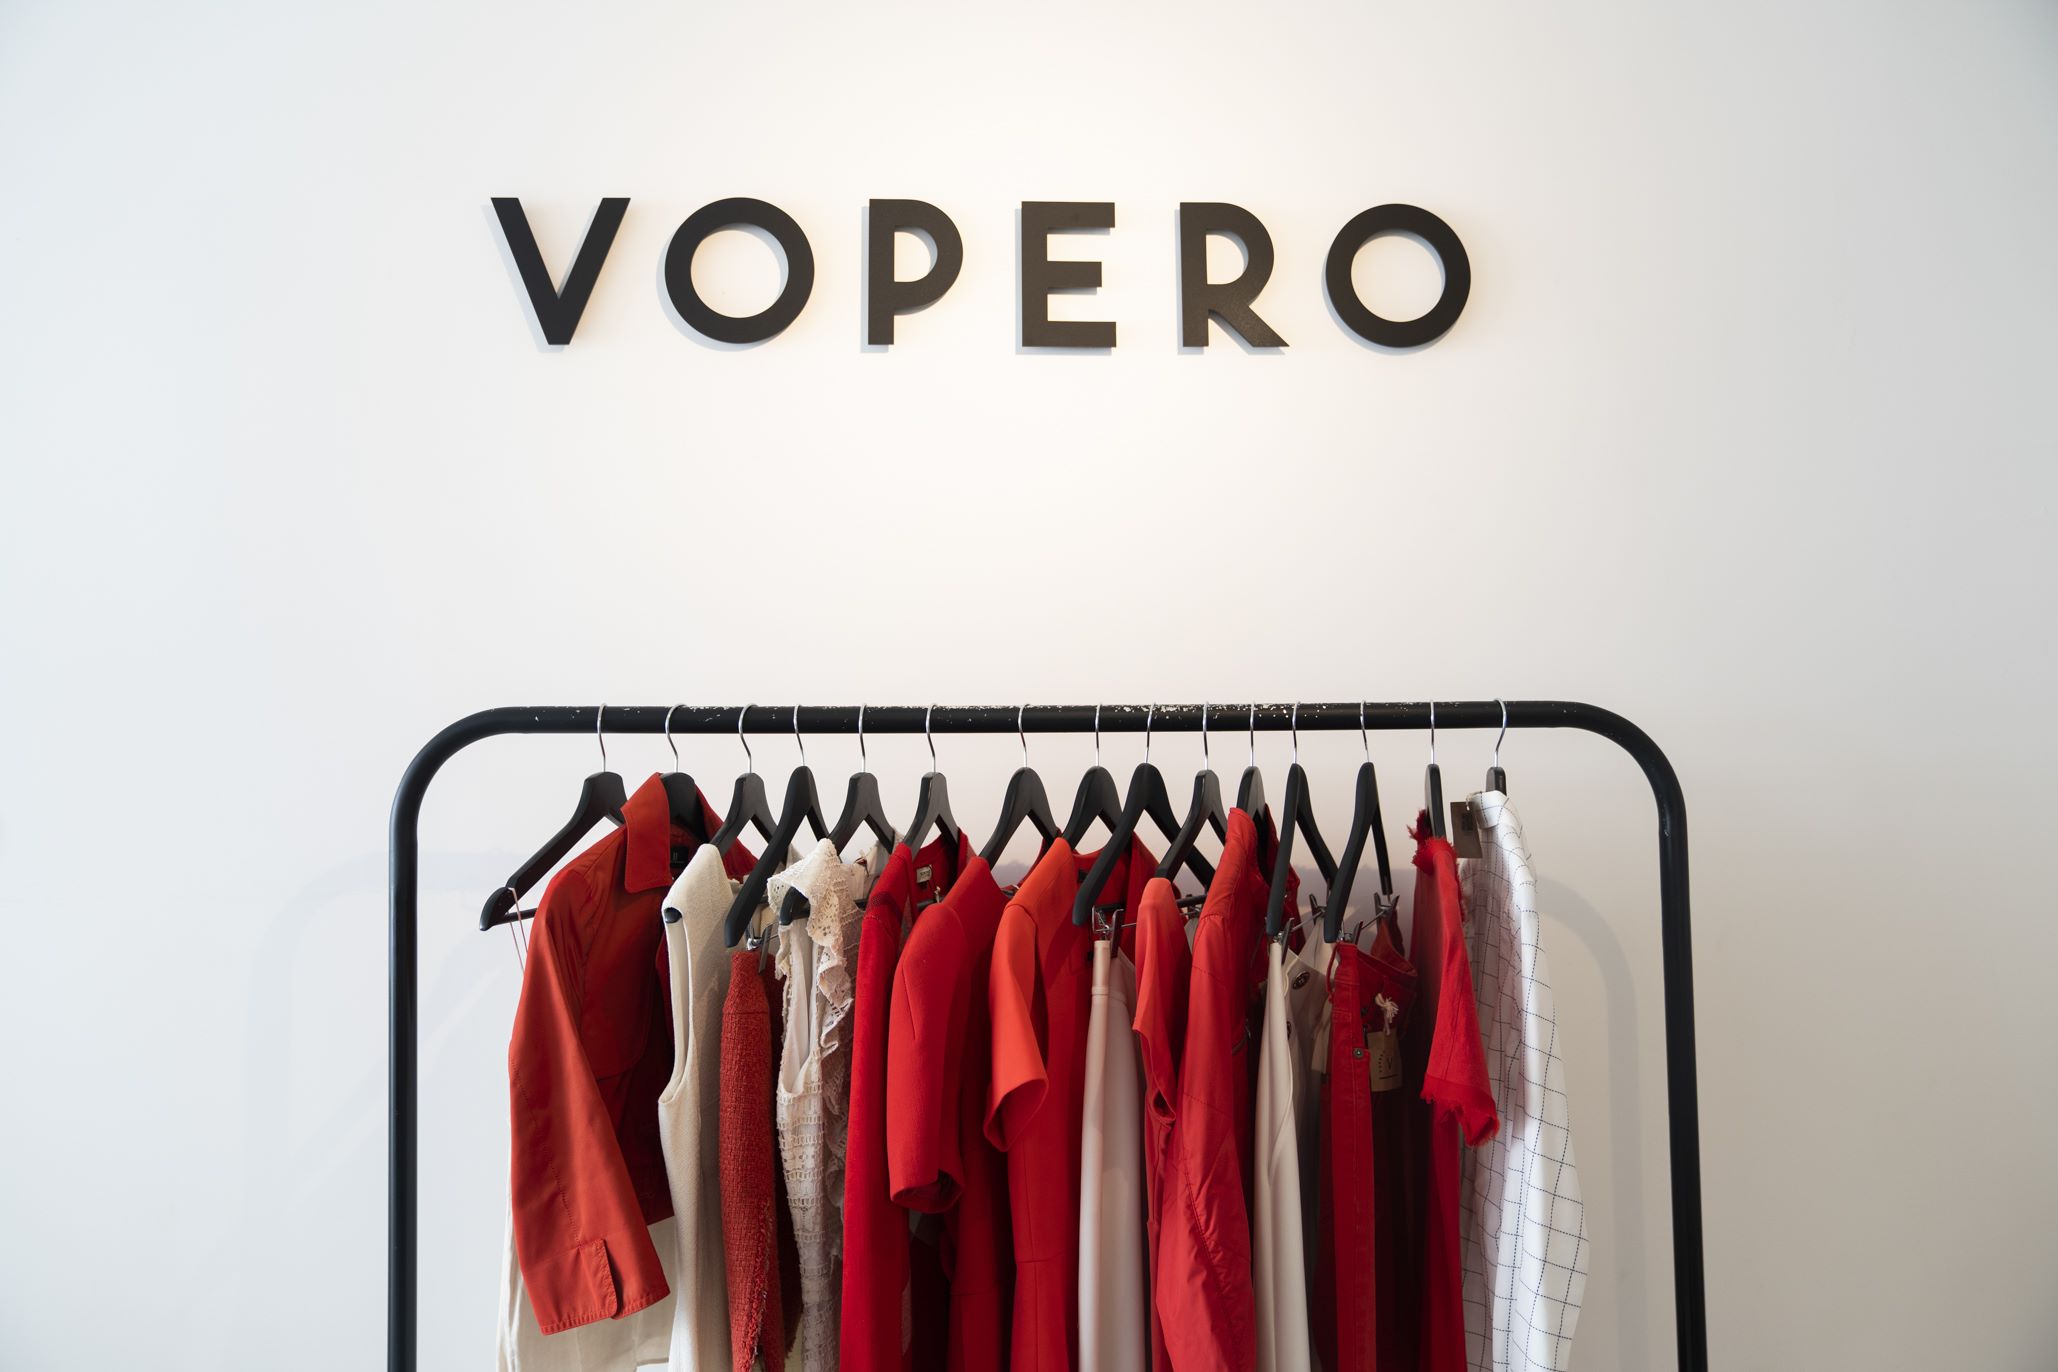 Vopero Receives $4 Million Funding To Expand Clothing Resale Marketplace In Latin America